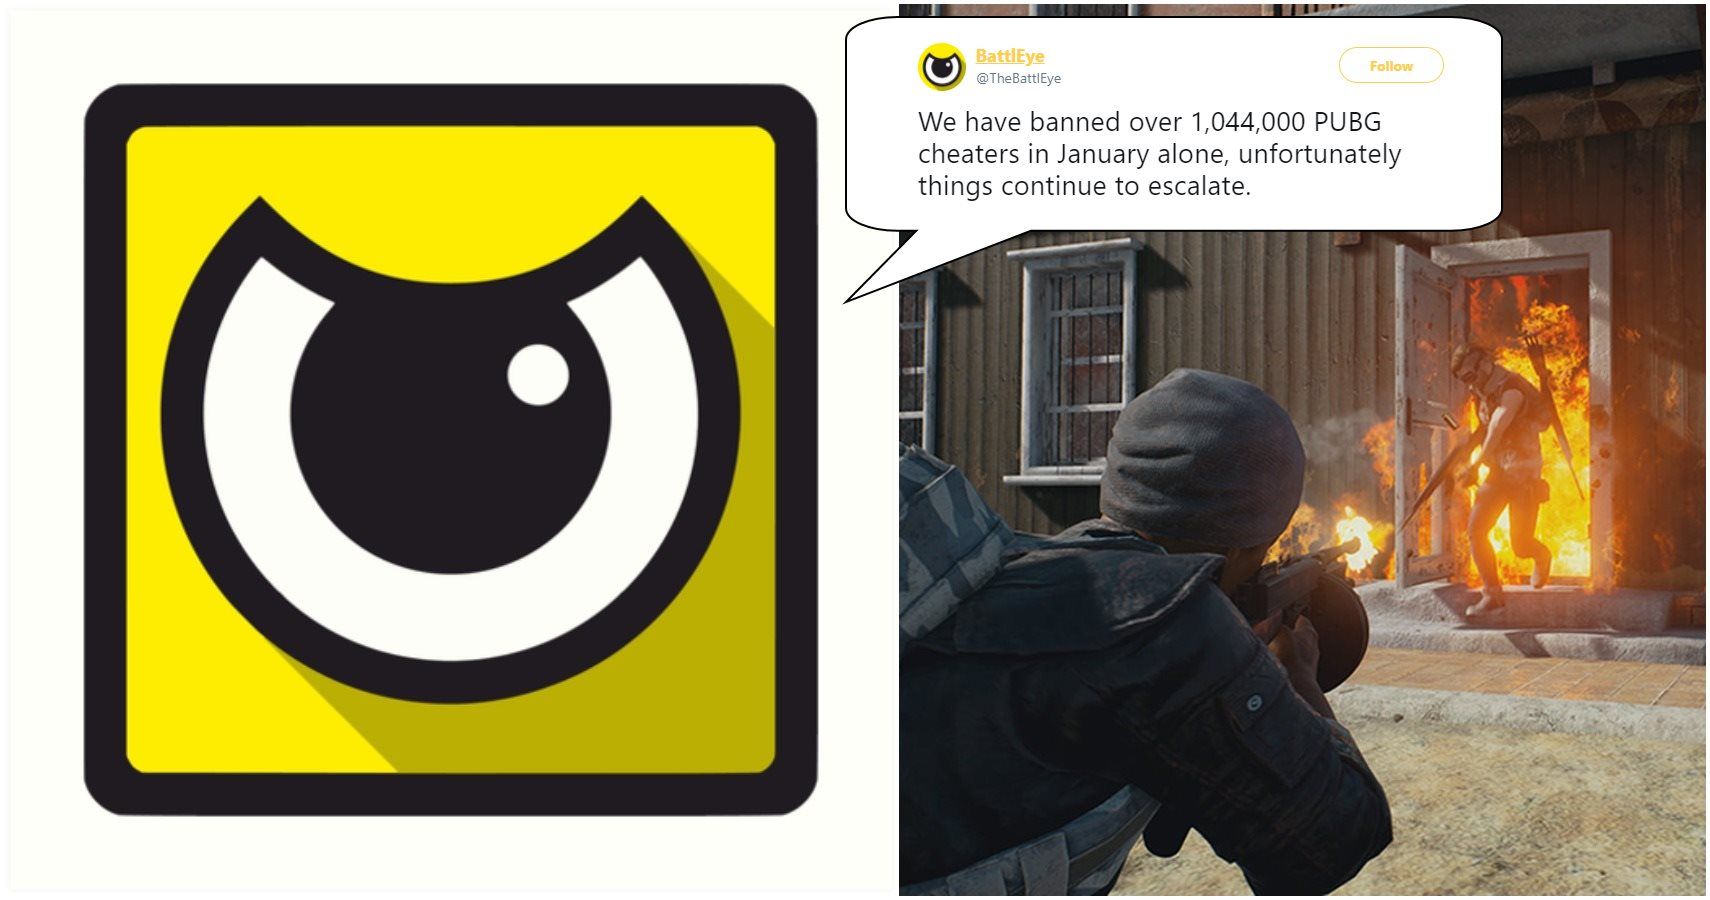 BattlEye: 'We Have Banned Over 1,044,000 PUBG Cheaters In January Alone'